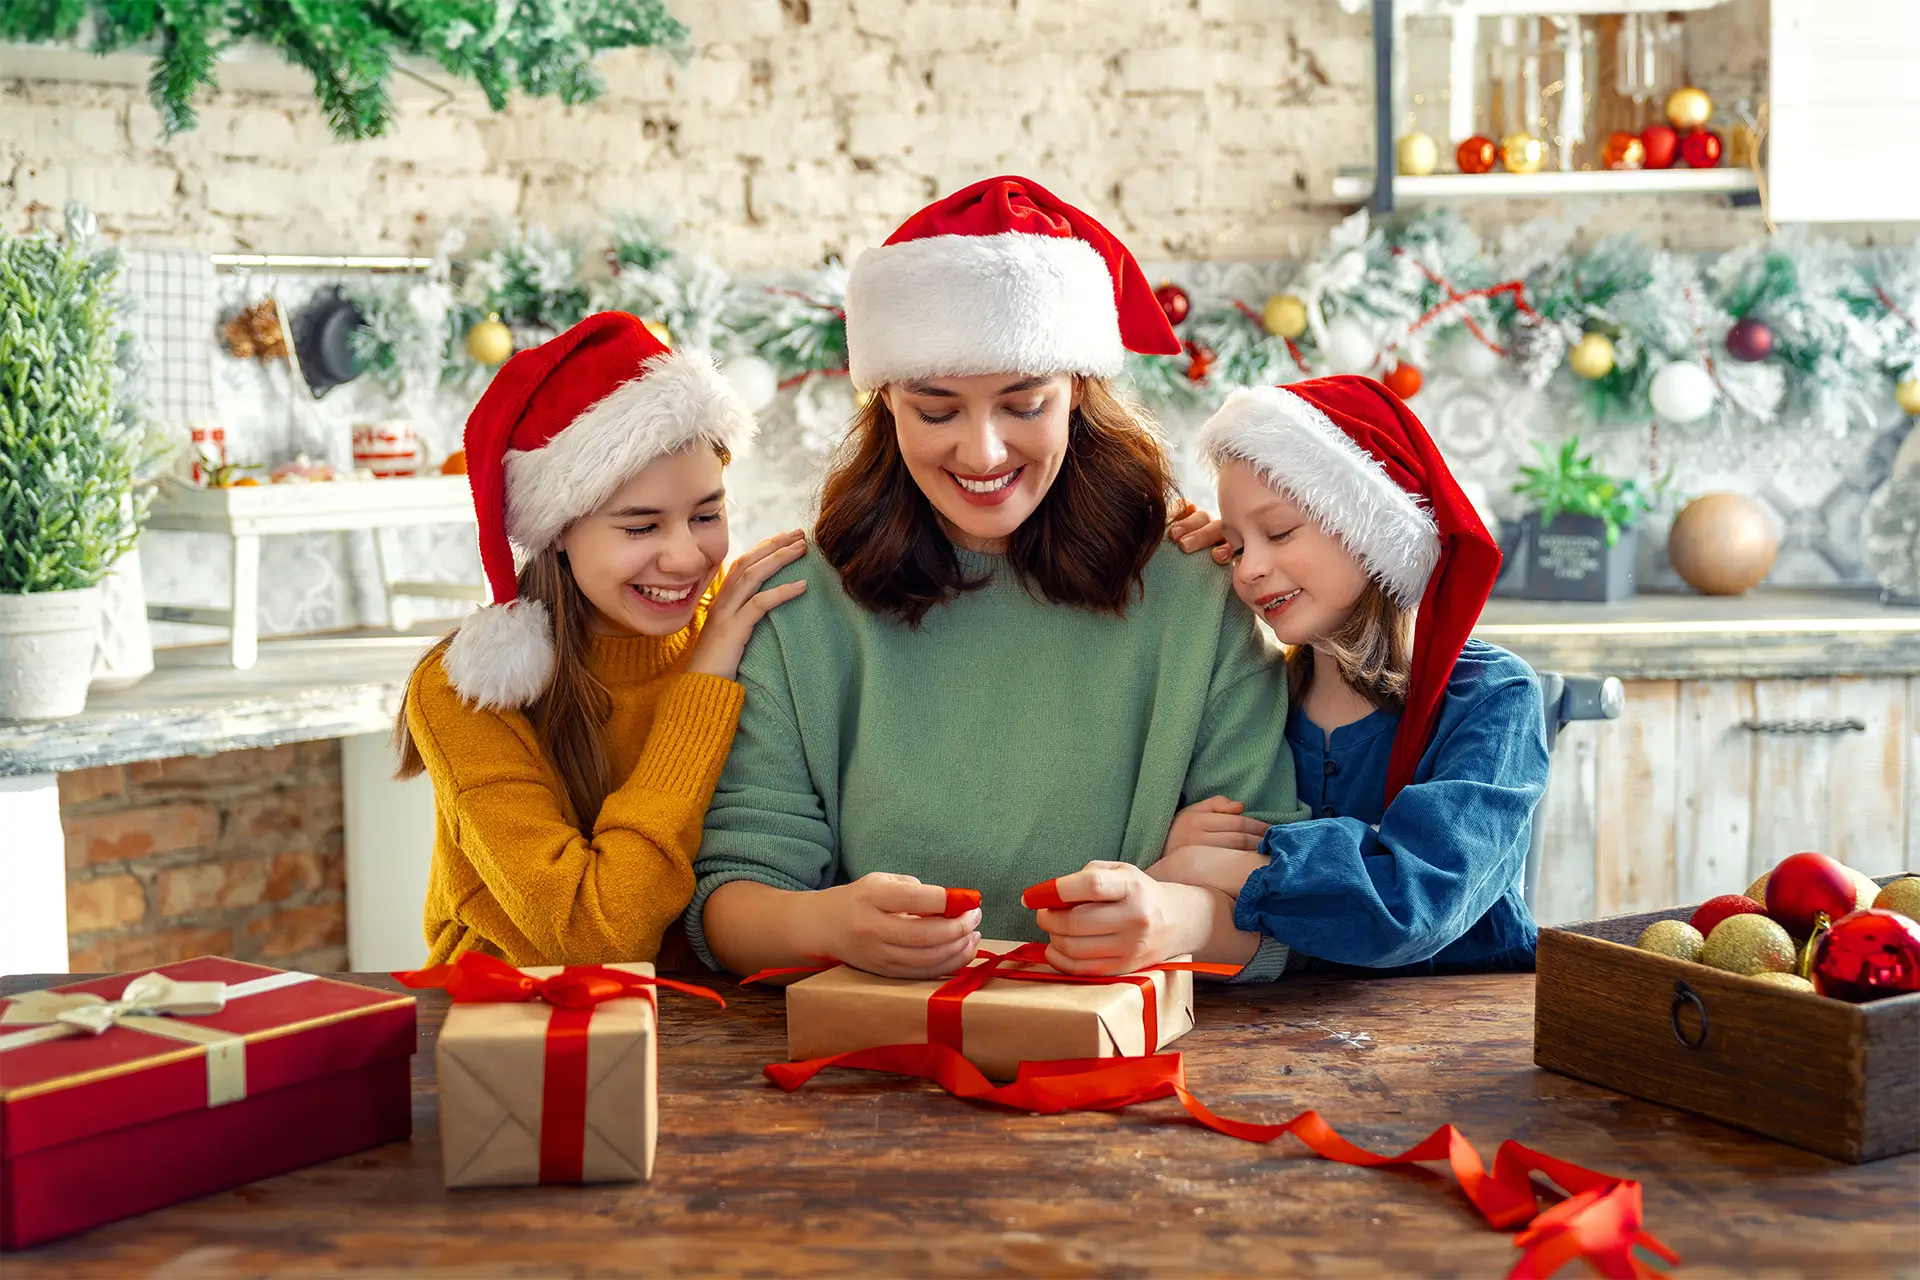 Mother and two daughters wrapping gifts wearing Santa hats.